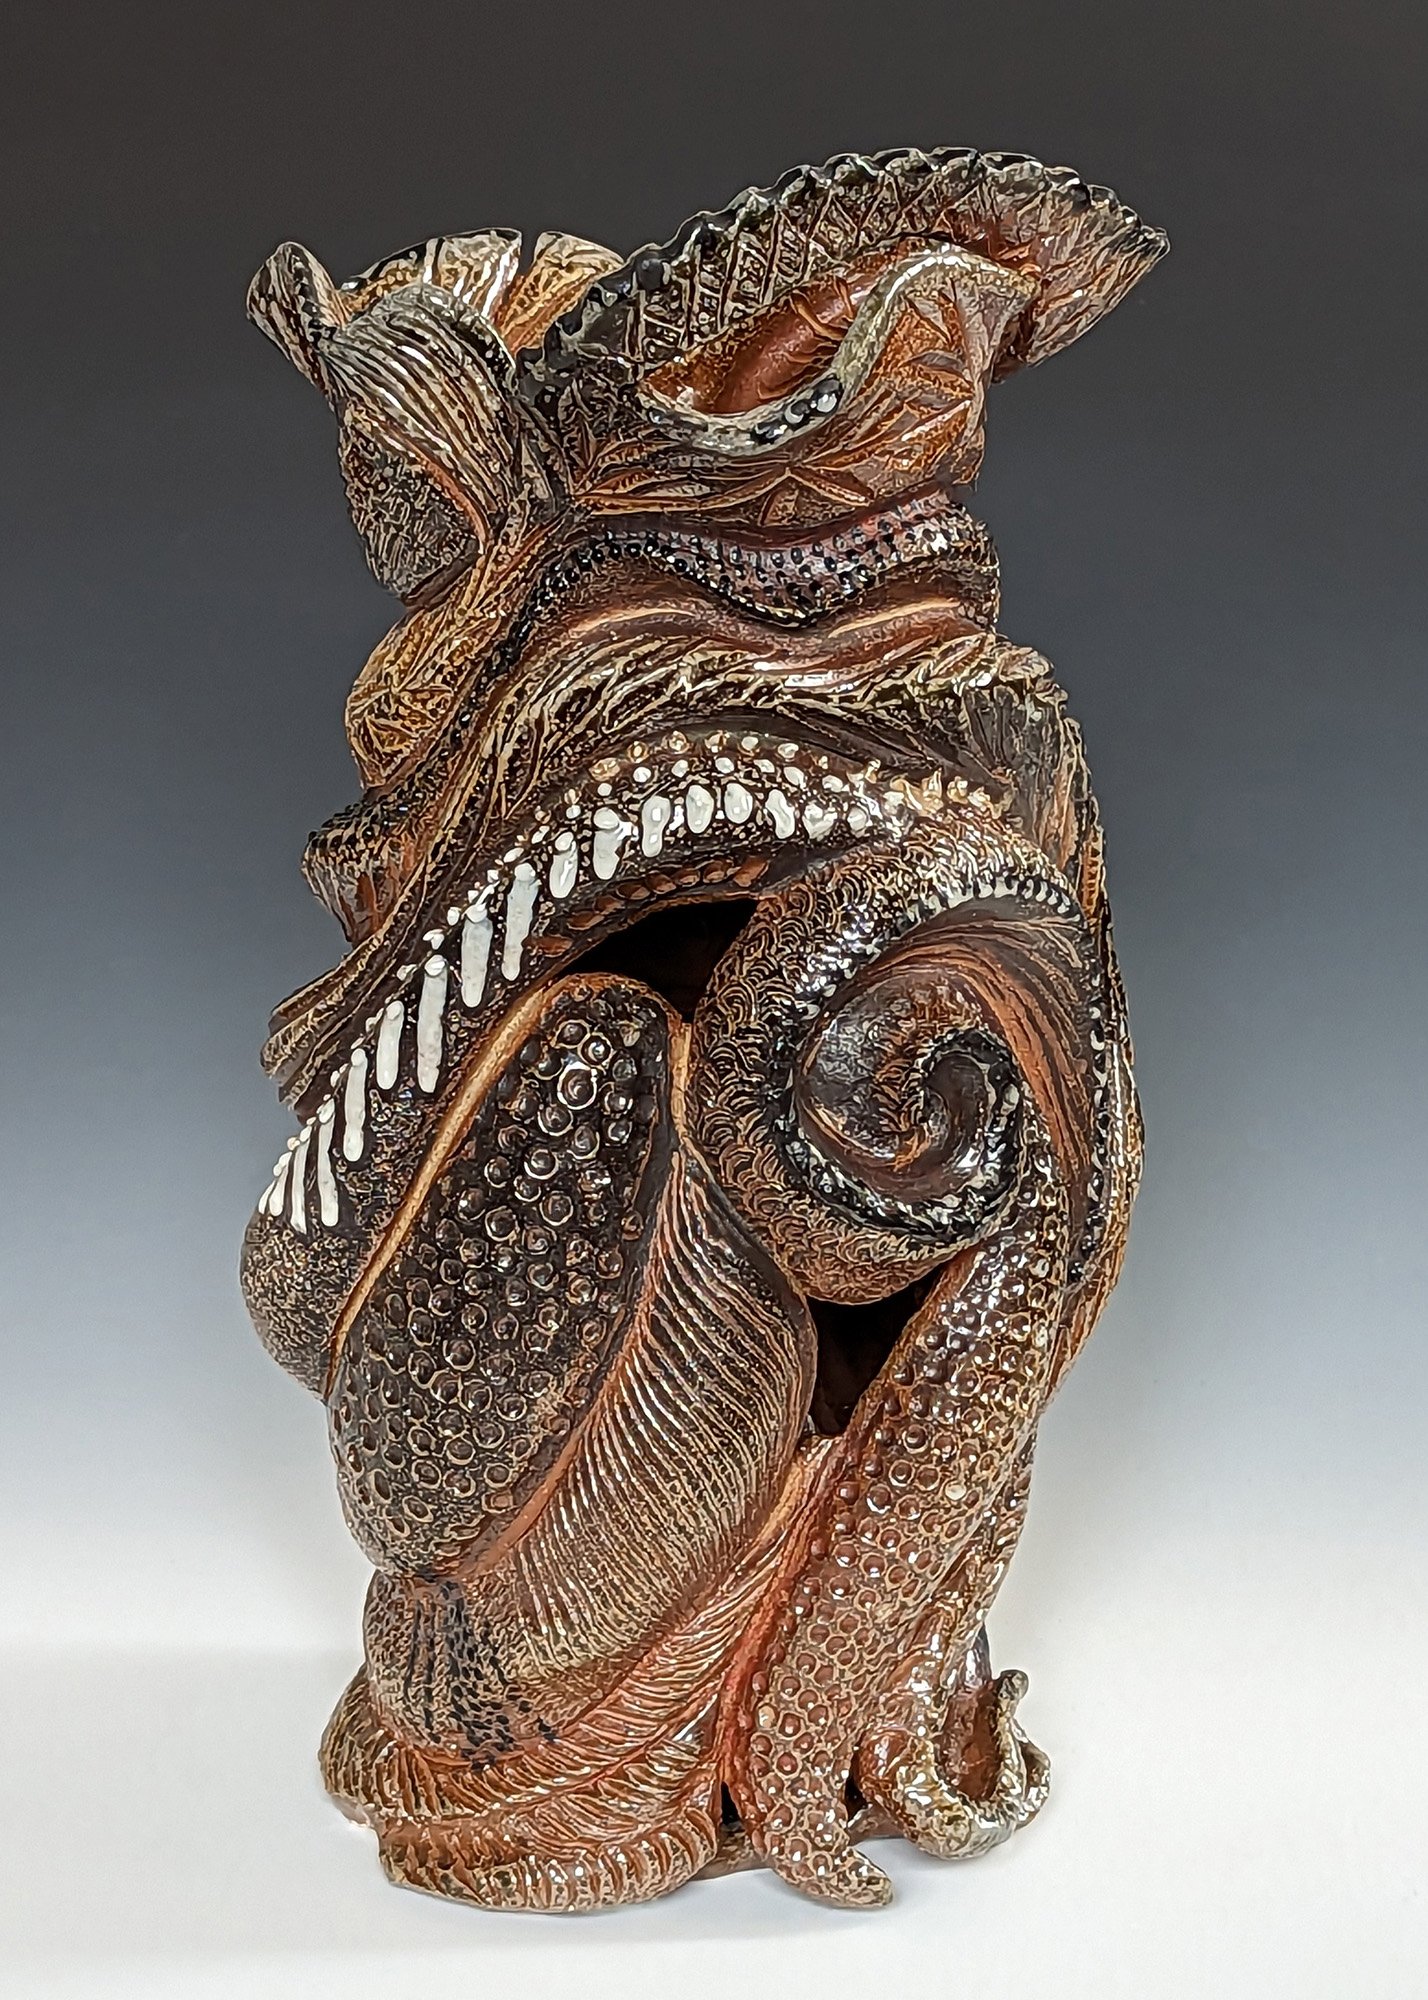    Dressed for the Ball,   wood-fired ceramics, 9.5 x 8 x 7 inches 